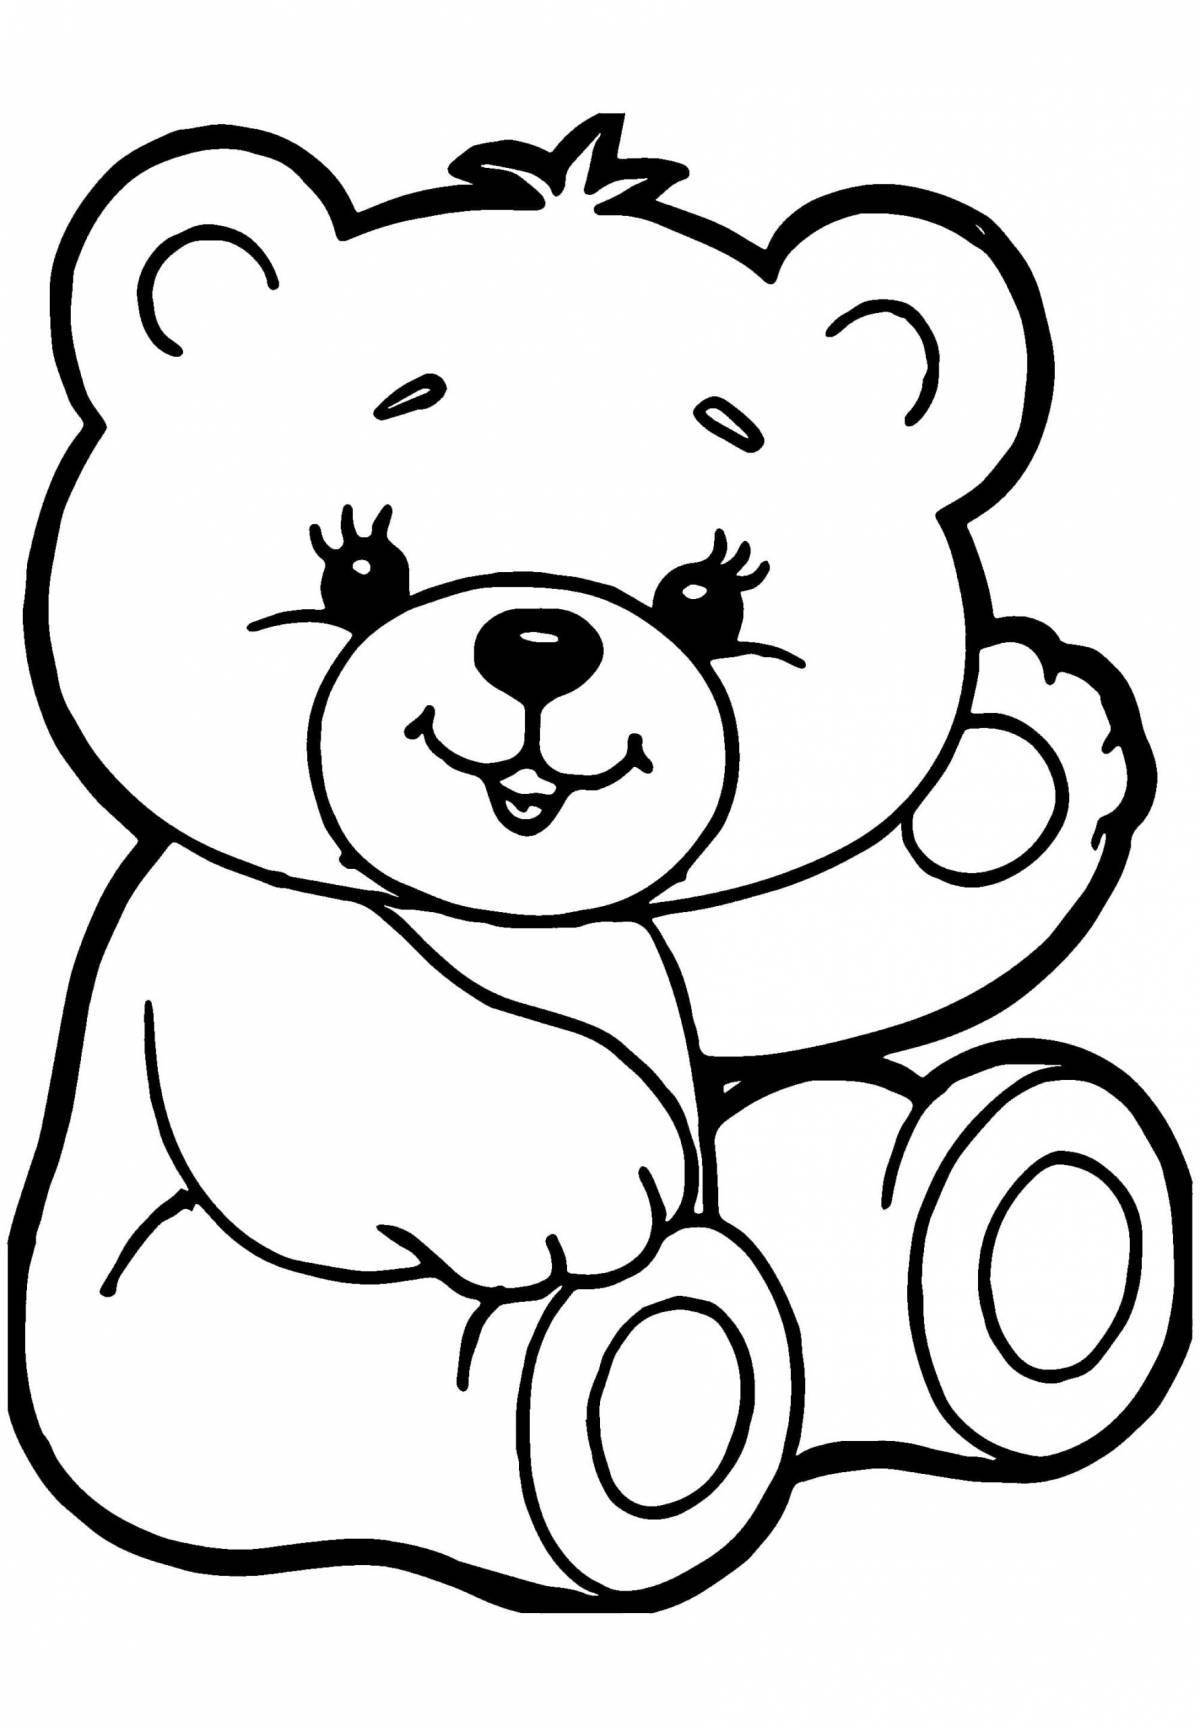 Delightful coloring bear for children 3-4 years old